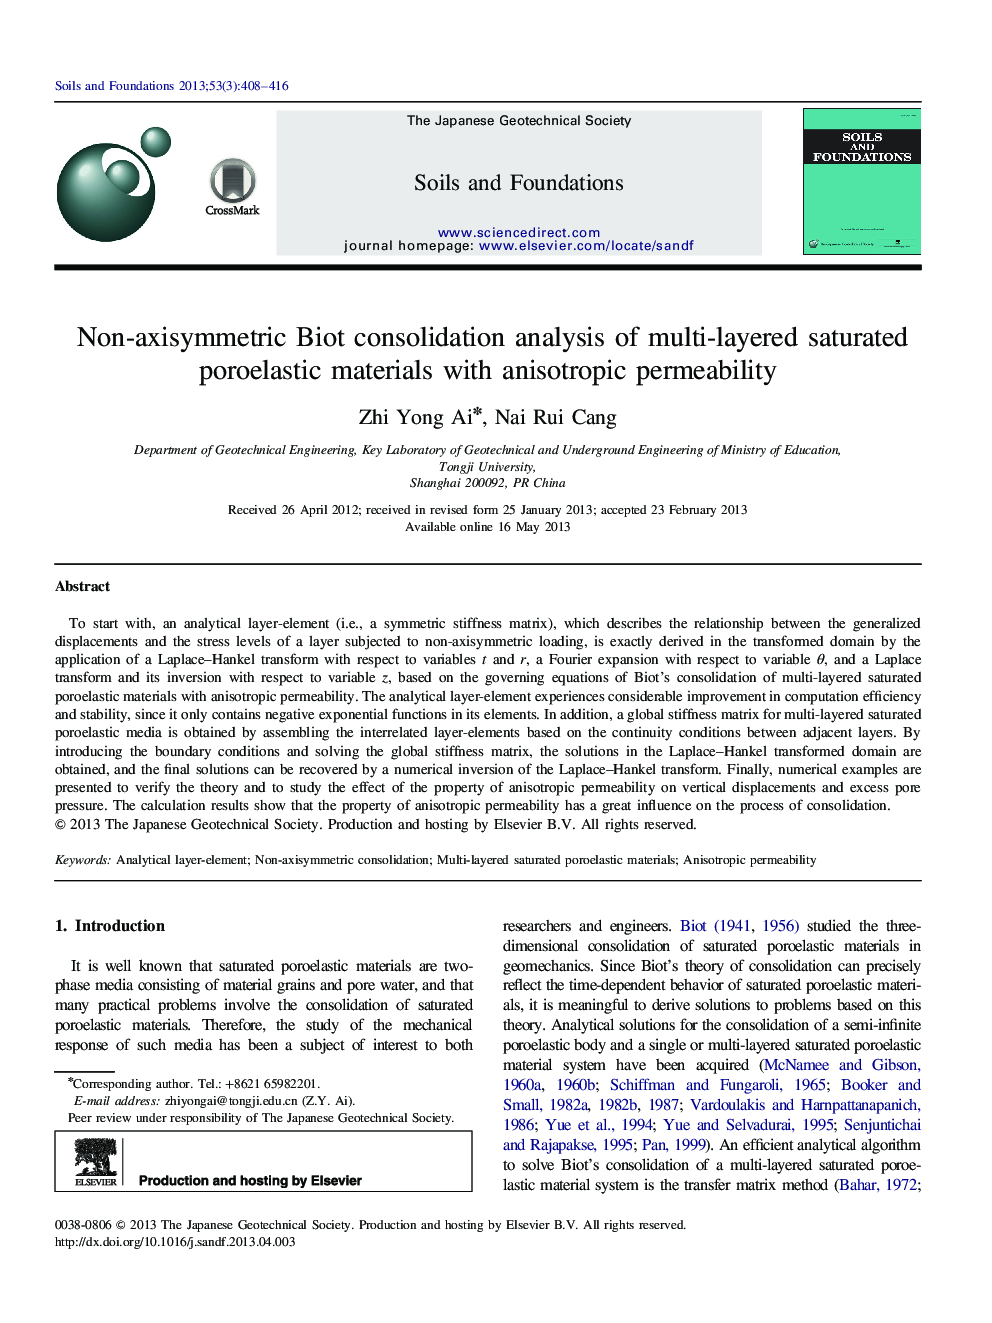 Non-axisymmetric Biot consolidation analysis of multi-layered saturated poroelastic materials with anisotropic permeability 